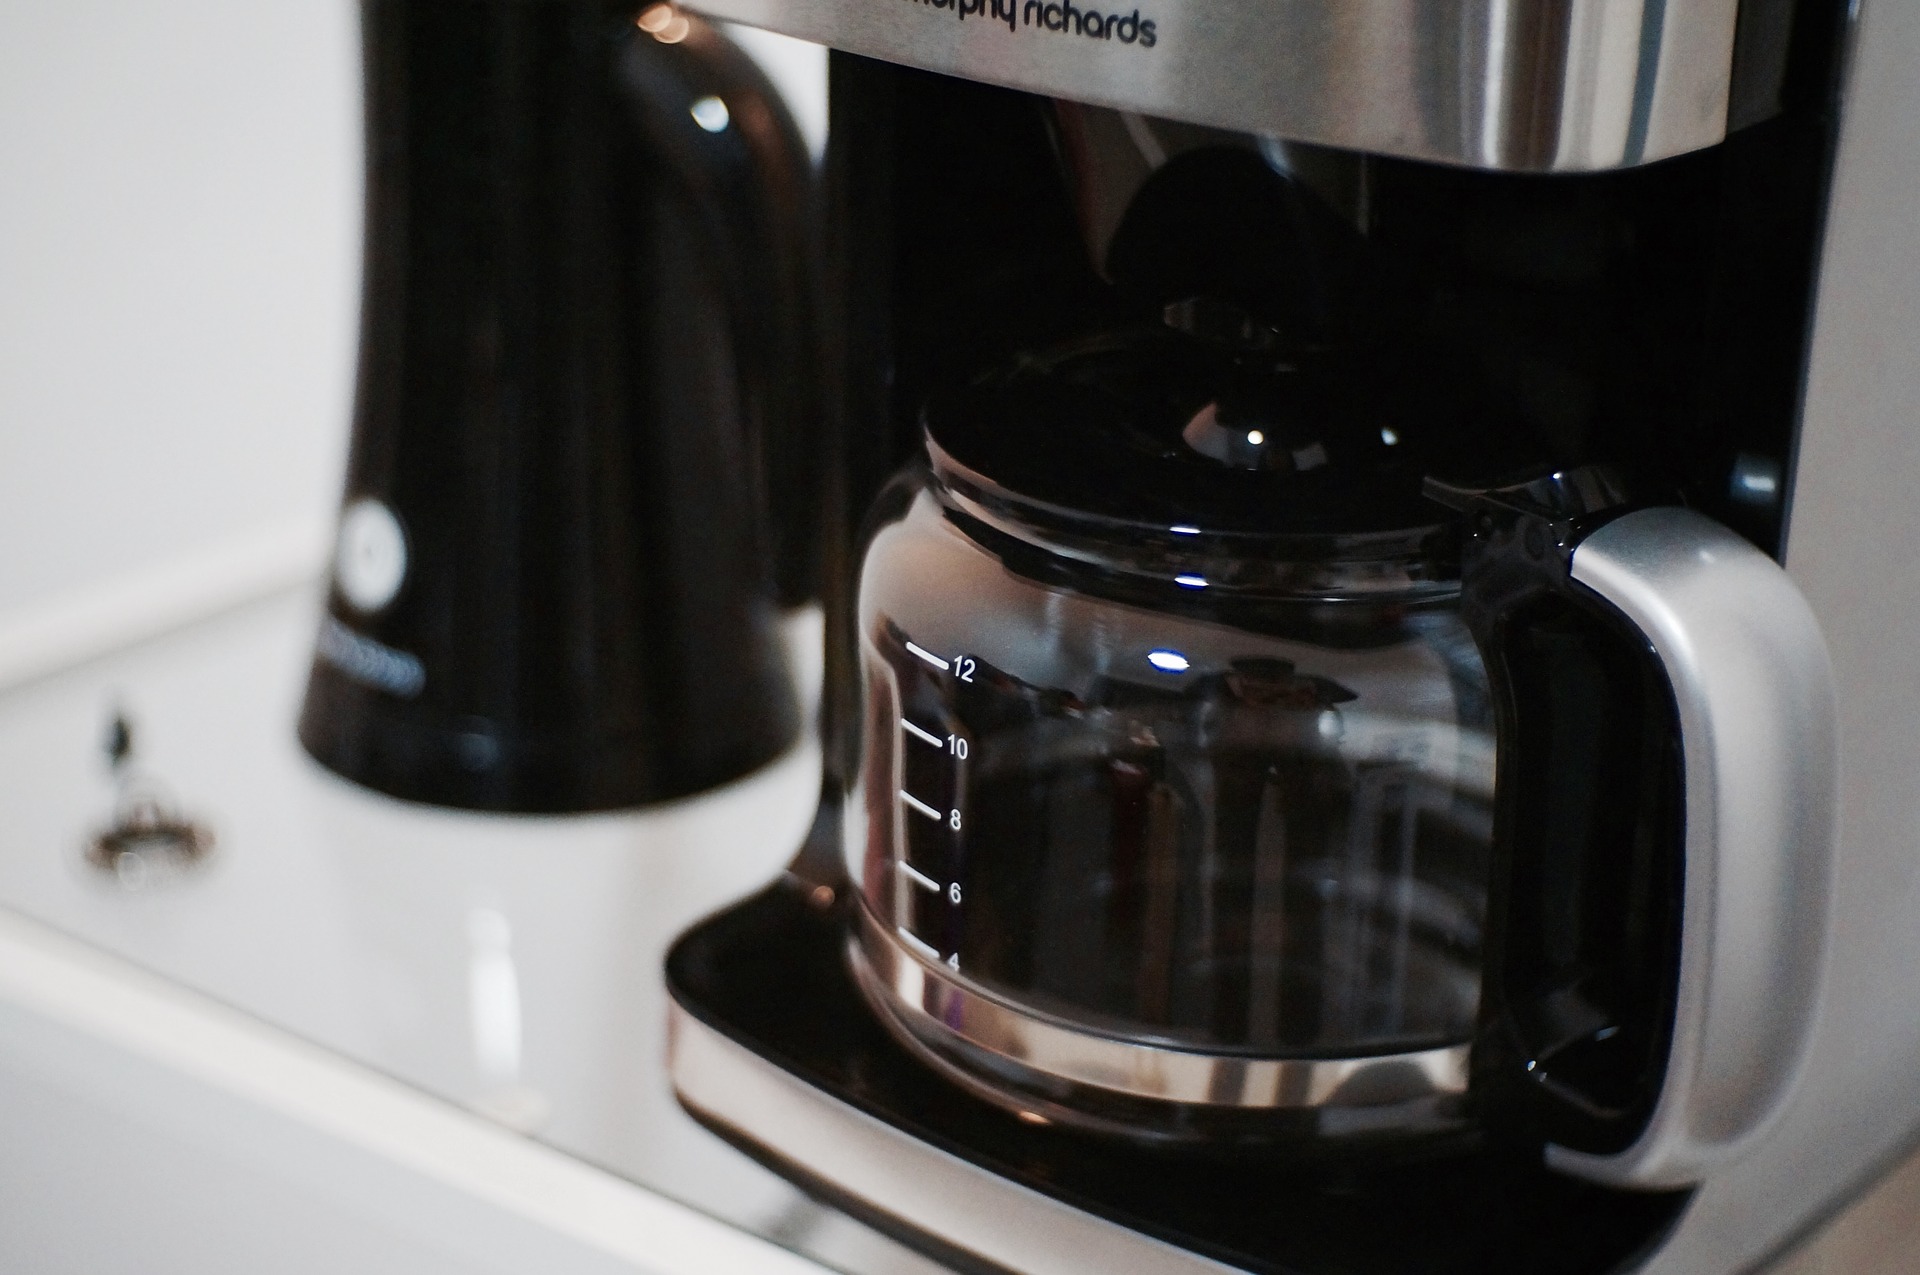 Ranking of the best drip coffee makers for 2022